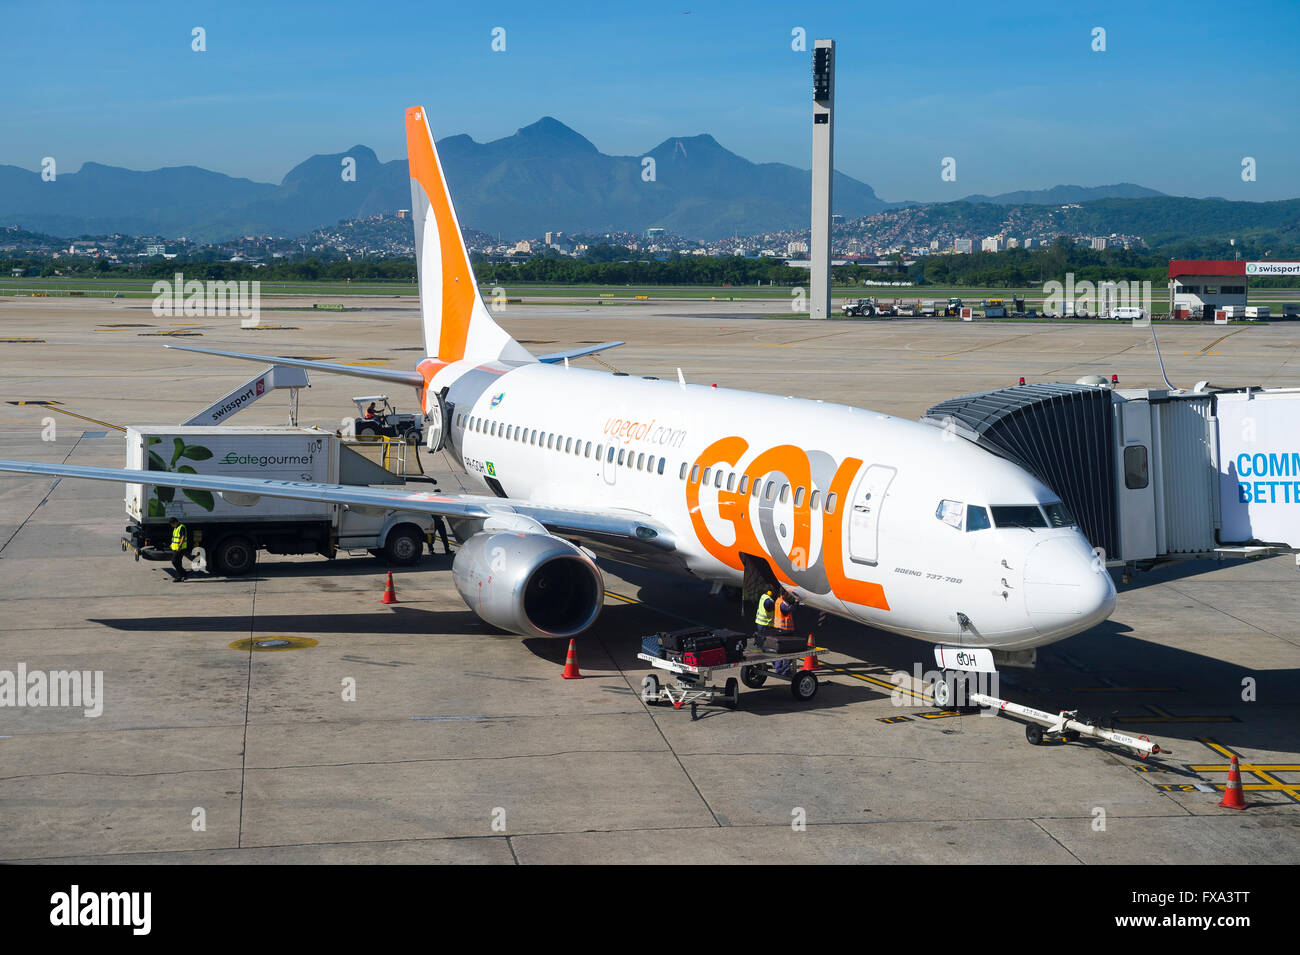 RIO DE JANEIRO - FEBRUARY 1, 2016: A jet owned by Gol, the Sao Paulo-based budget airline, prepares for flight at Galeao airport Stock Photo